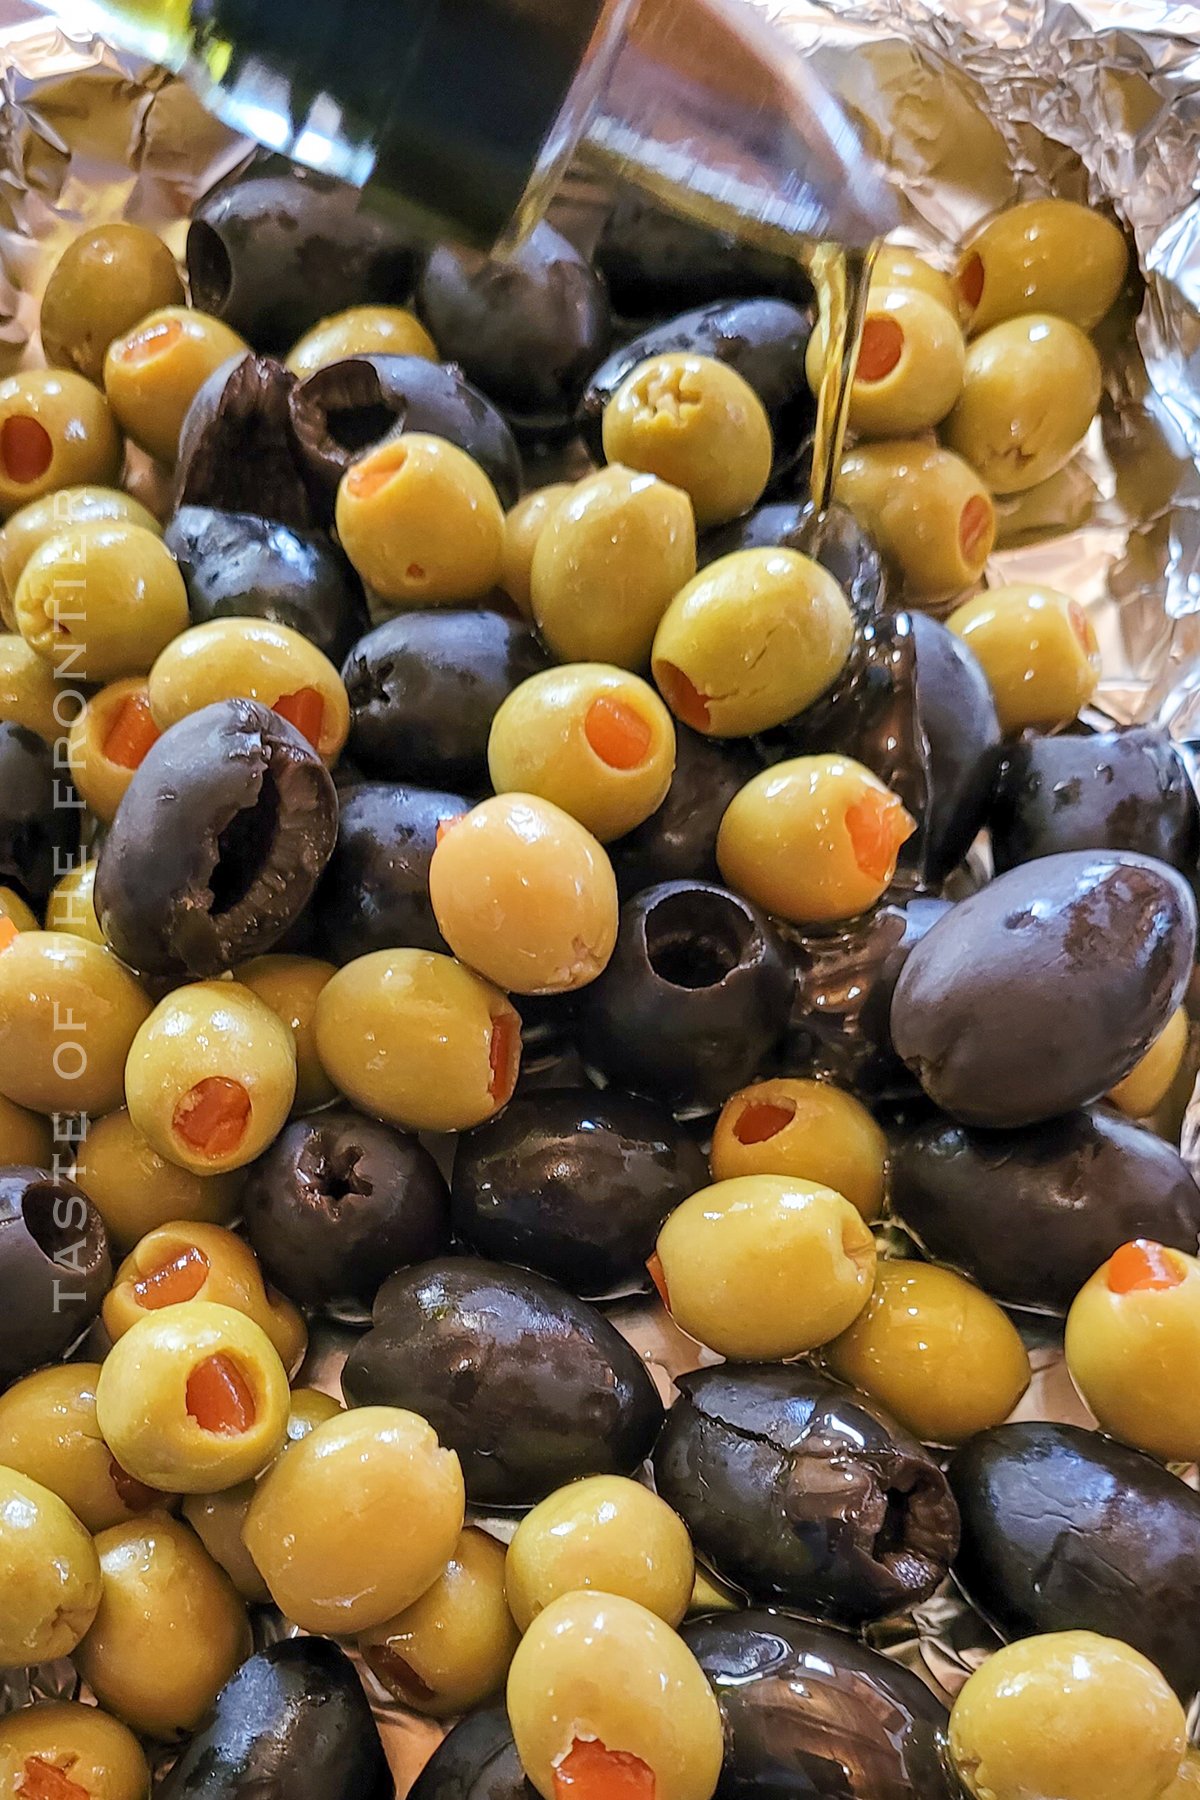 How to Make Smoked Olives